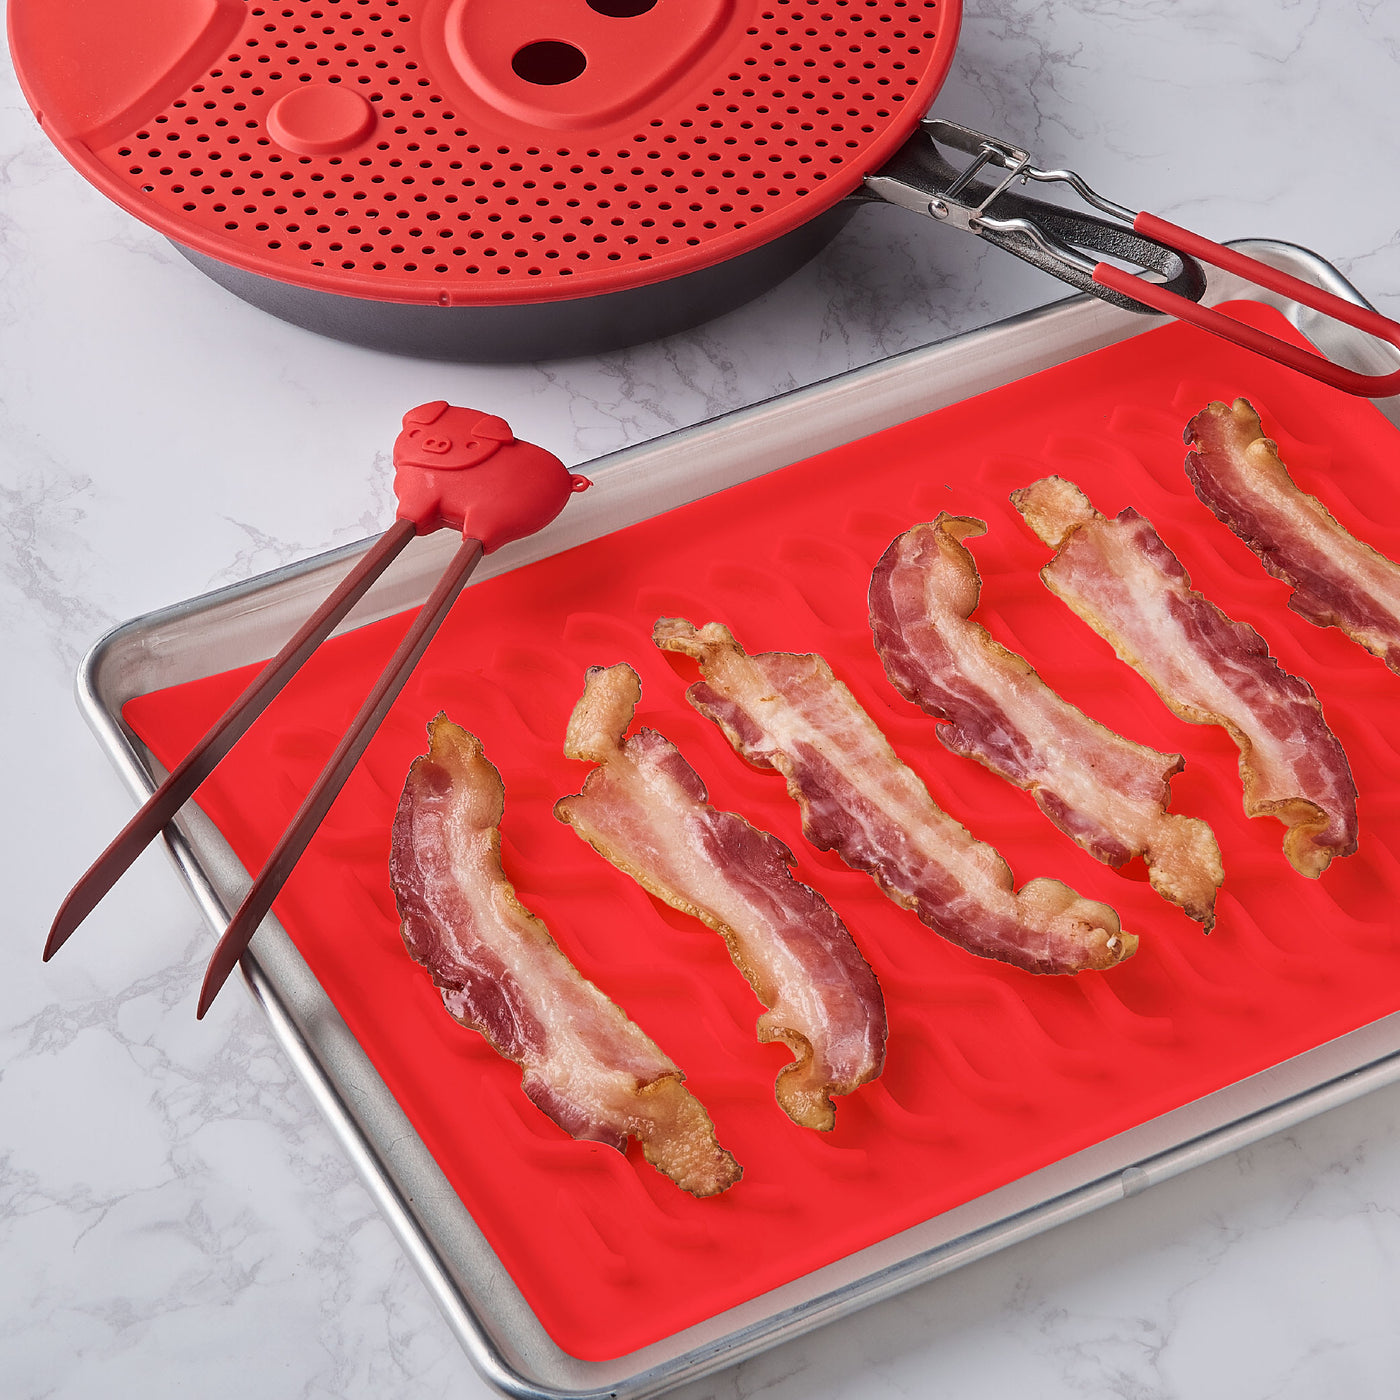 Talisman Designs Silicone Bacon Tongs | Heat Resistant up to 400-Degrees |  Turn & Serve Hot Bacon | Safe for Non-Stick Cookware, Meat, Vegetables 